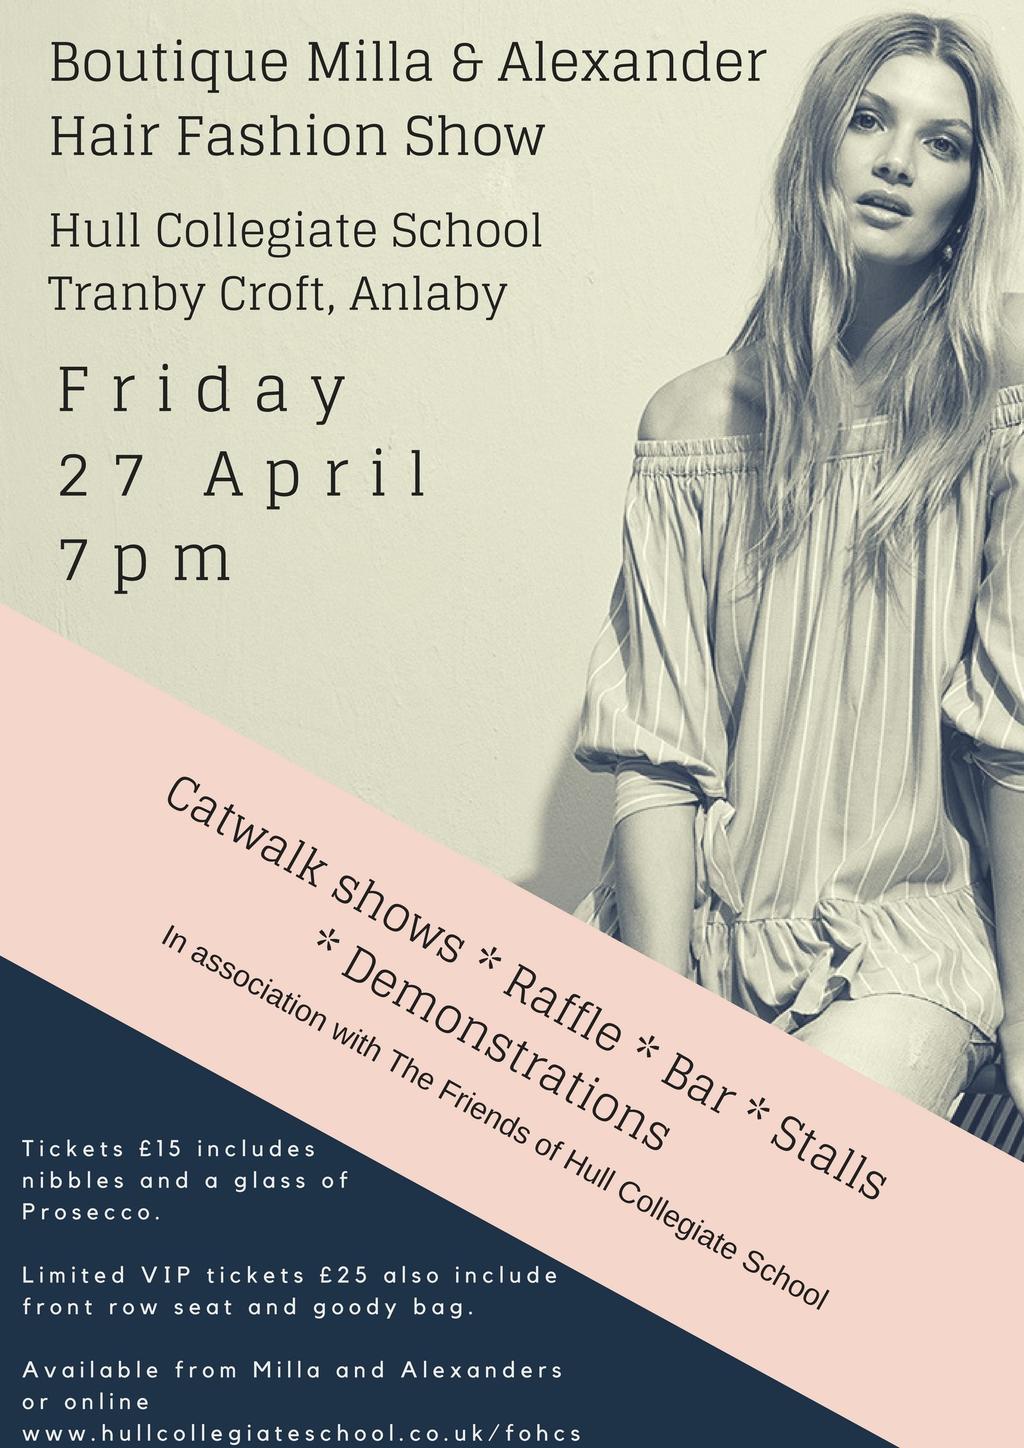 com/fundraising/ runningforhope2018 Boutique Milla and Alexander Hair Fashion Show, Friday 27 April Enjoy catwalk shows, hair and makeup demonstrations, access to stall holders, exclusive raffle